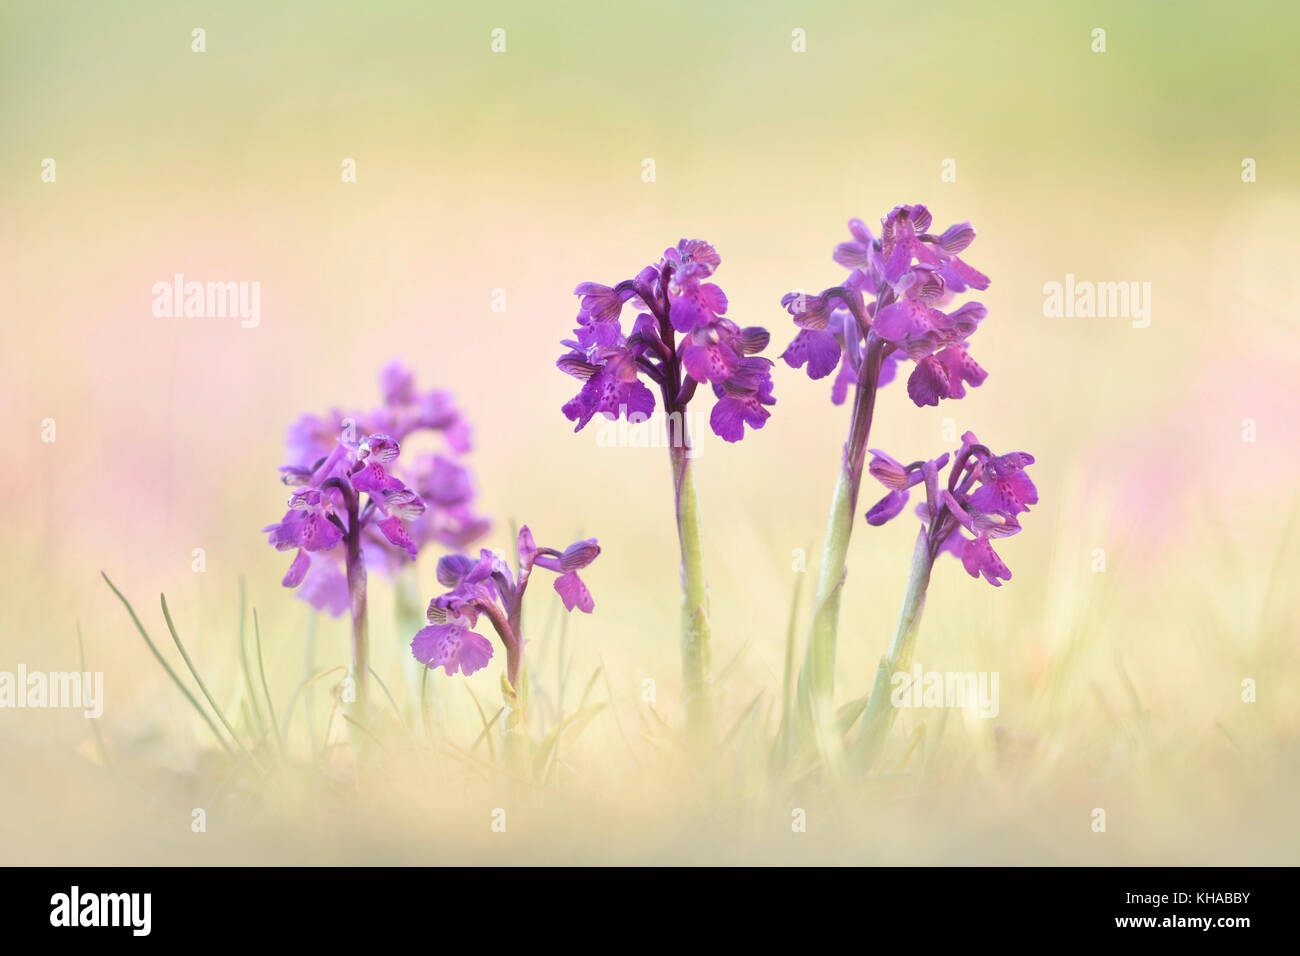 Green-winged orchid (Anacamptis morio), Thuringia, Germany Stock Photo